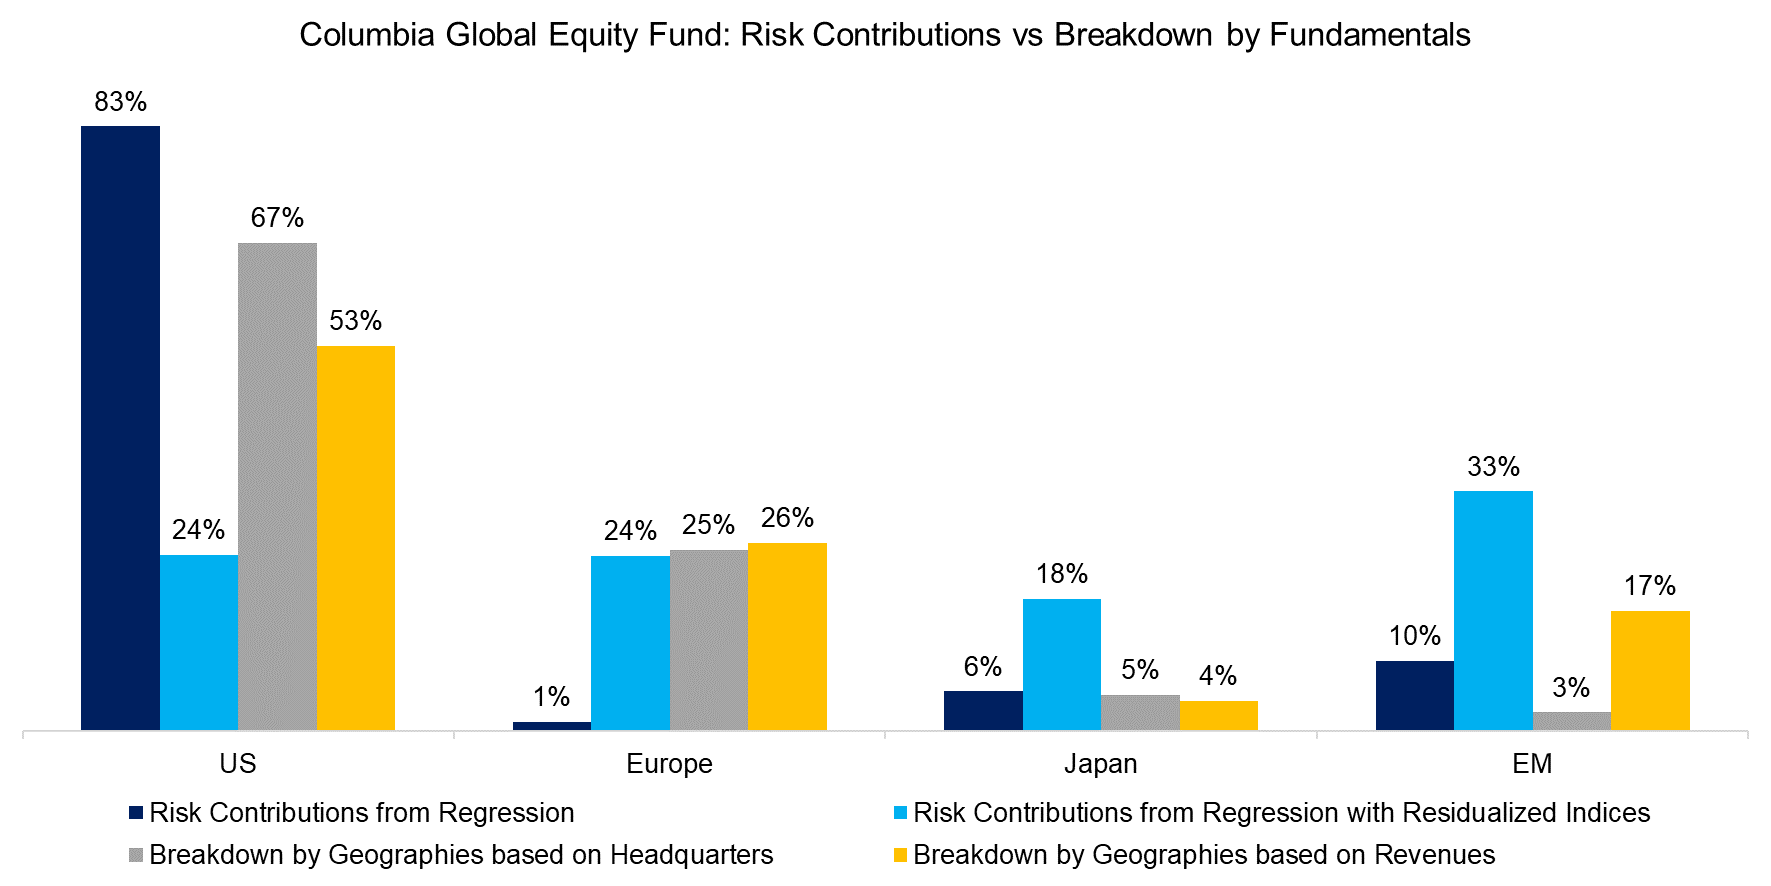 https://wps.factorresearch.com/wp-content/uploads/2022/12/Columbia-Global-Equity-Fund-Risk-Contributions-vs-Breakdown-by-Fundamentals.png